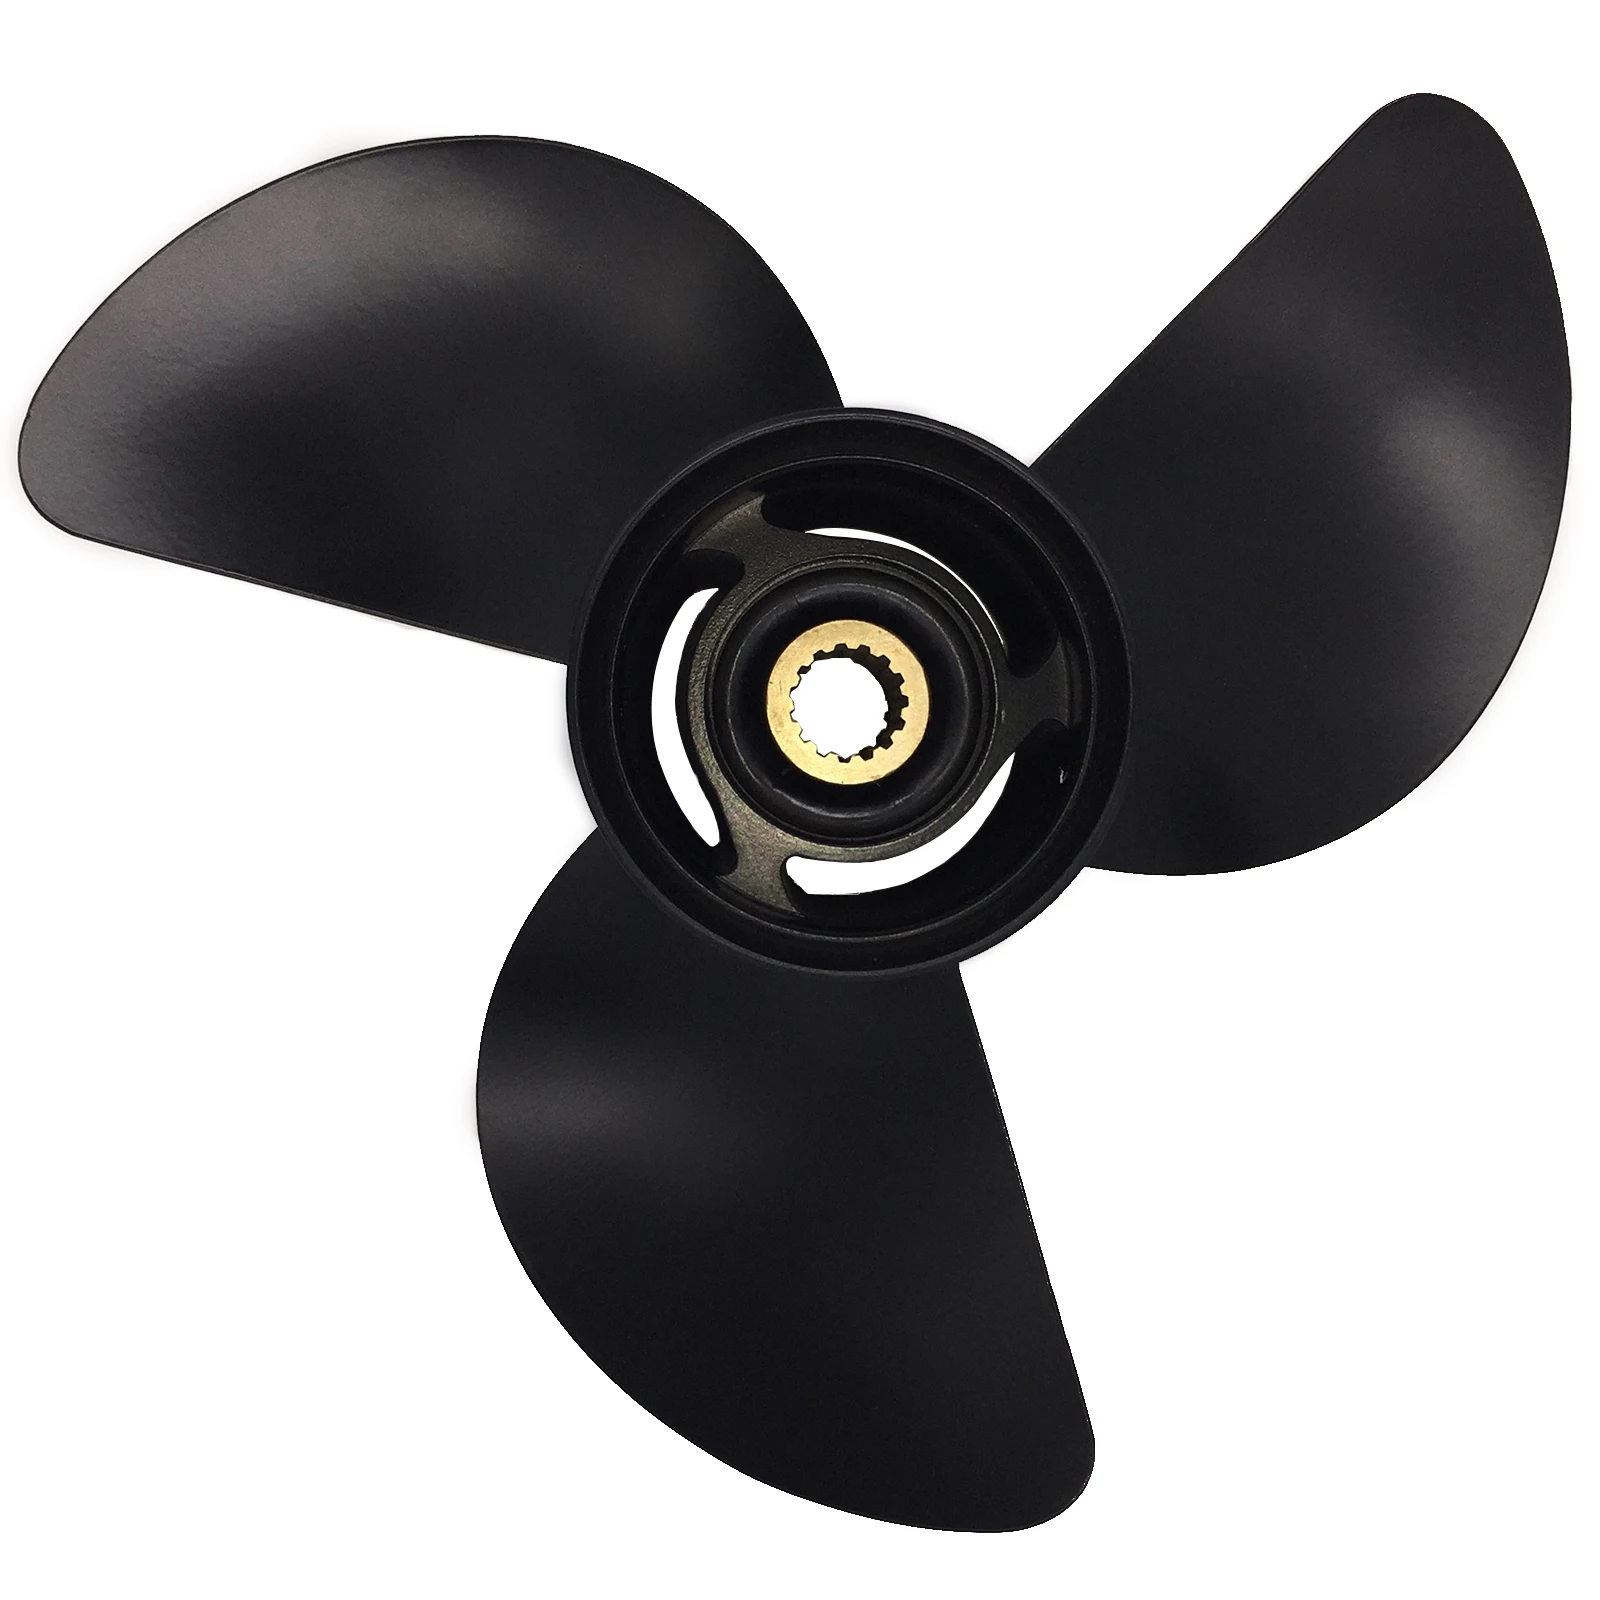 Boat Propeller 13.2x21 for Tohatsu 60HP-125HP 3 Blades Aluminum 15 Tooth RH OEM NO: 3HKB64545-0 13.2x21